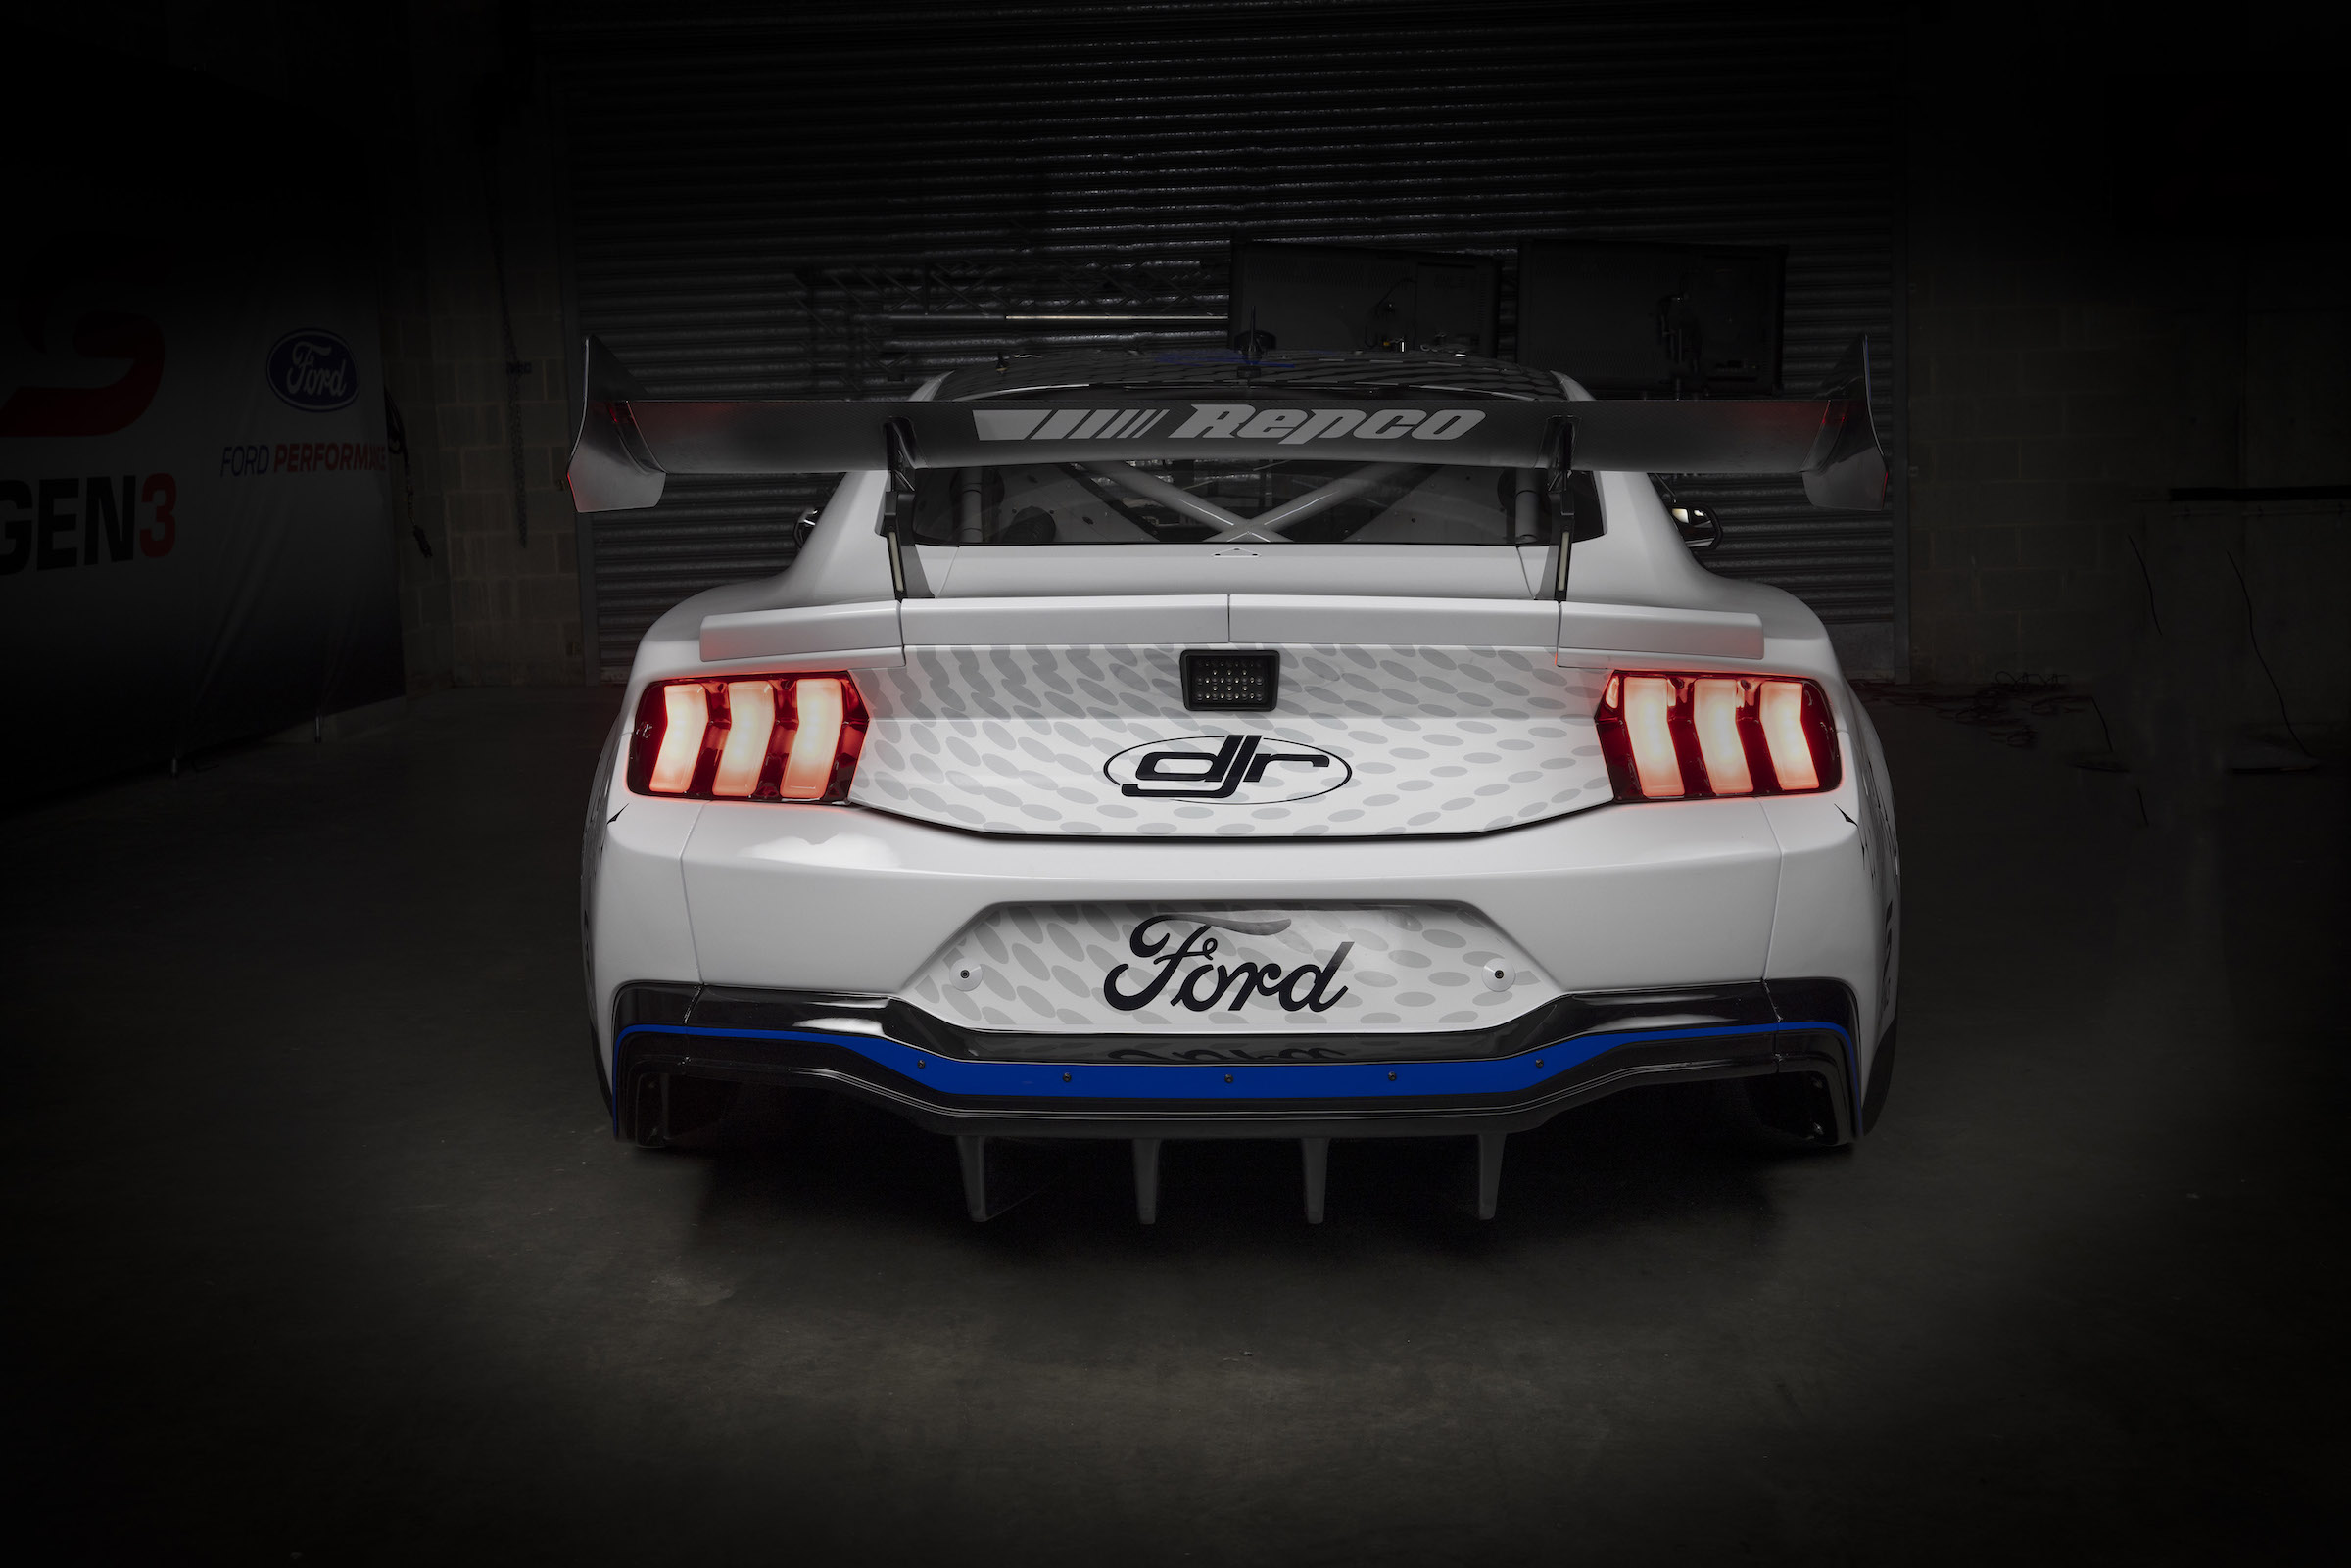 S650 Mustang All-New Ford Mustang (S650) GT Supercars Race Car Revealed at Bathurst 1000 EV-11-22-1J1A0630